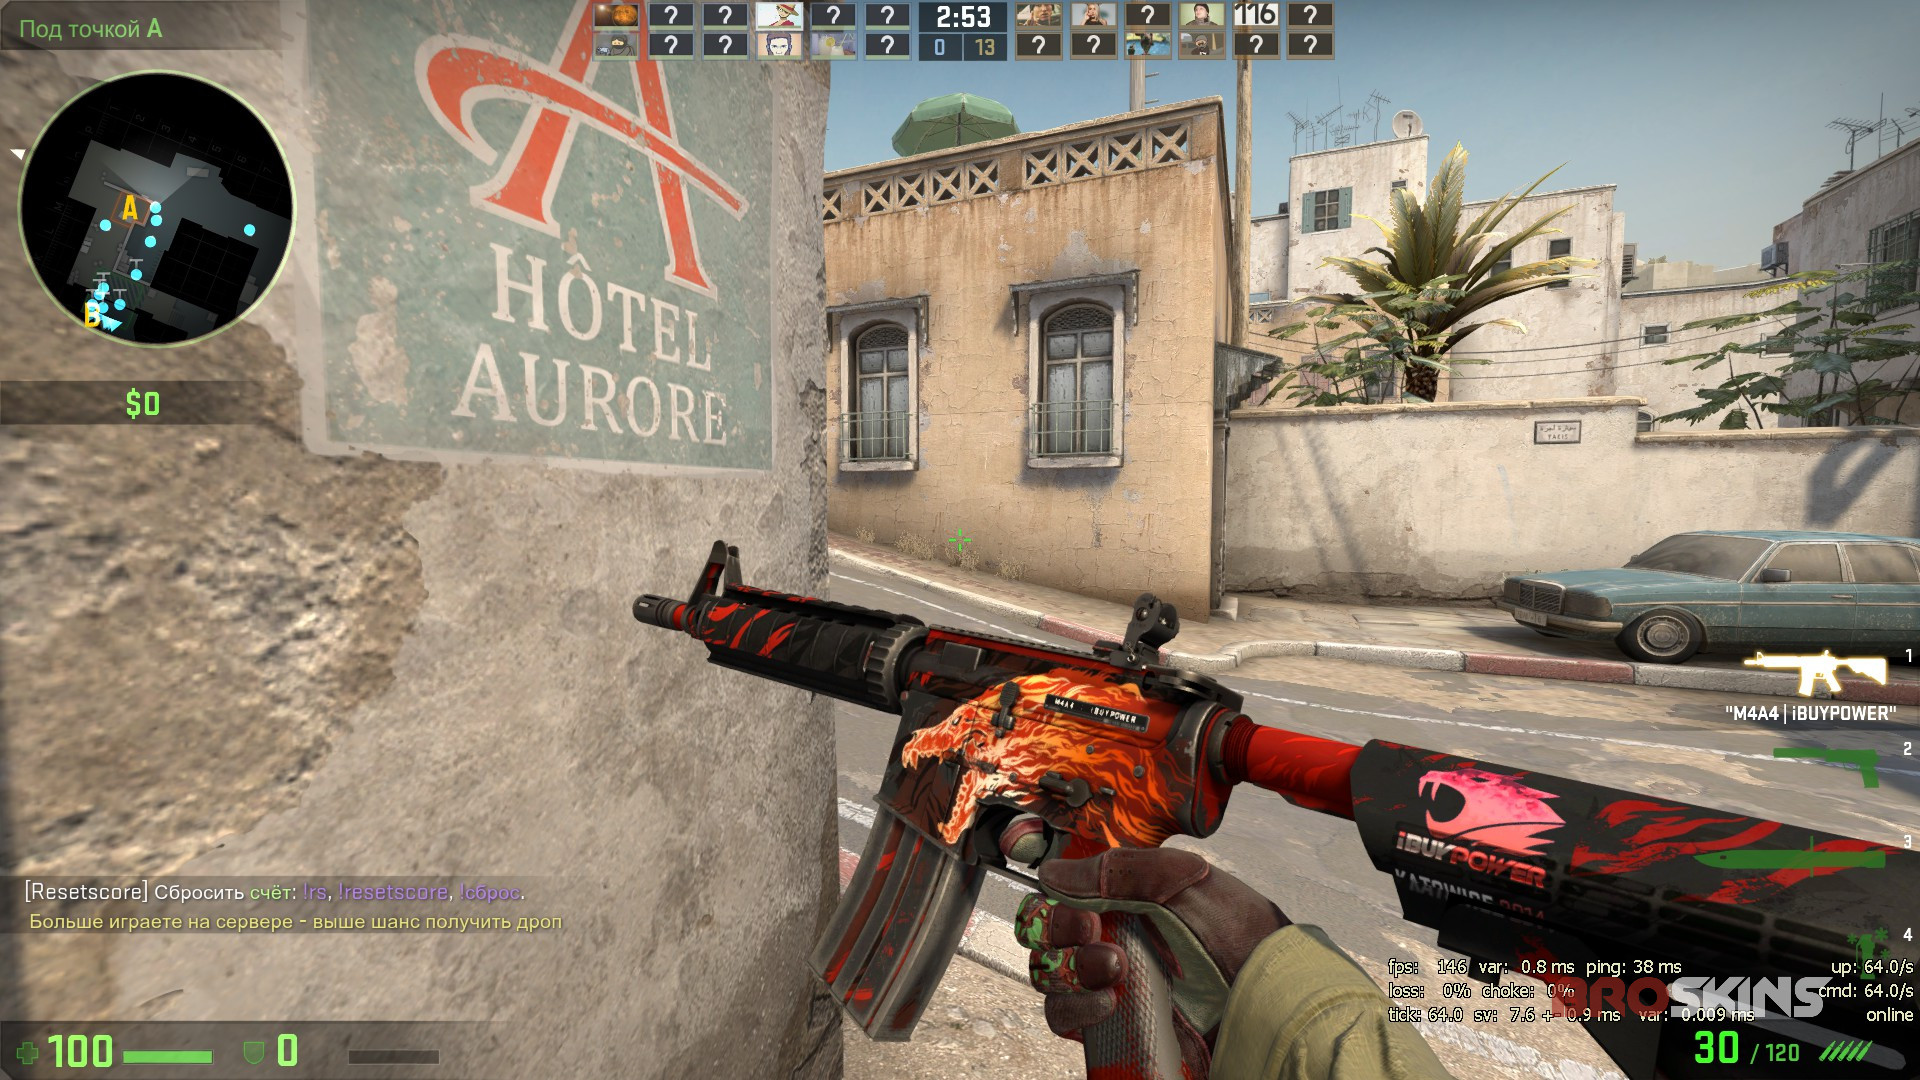 Thread watched M4A4 Howl Field-Tested + iBUYPOWER (Holo) Katowice 2014 and Sport Gloves Bronze Morph